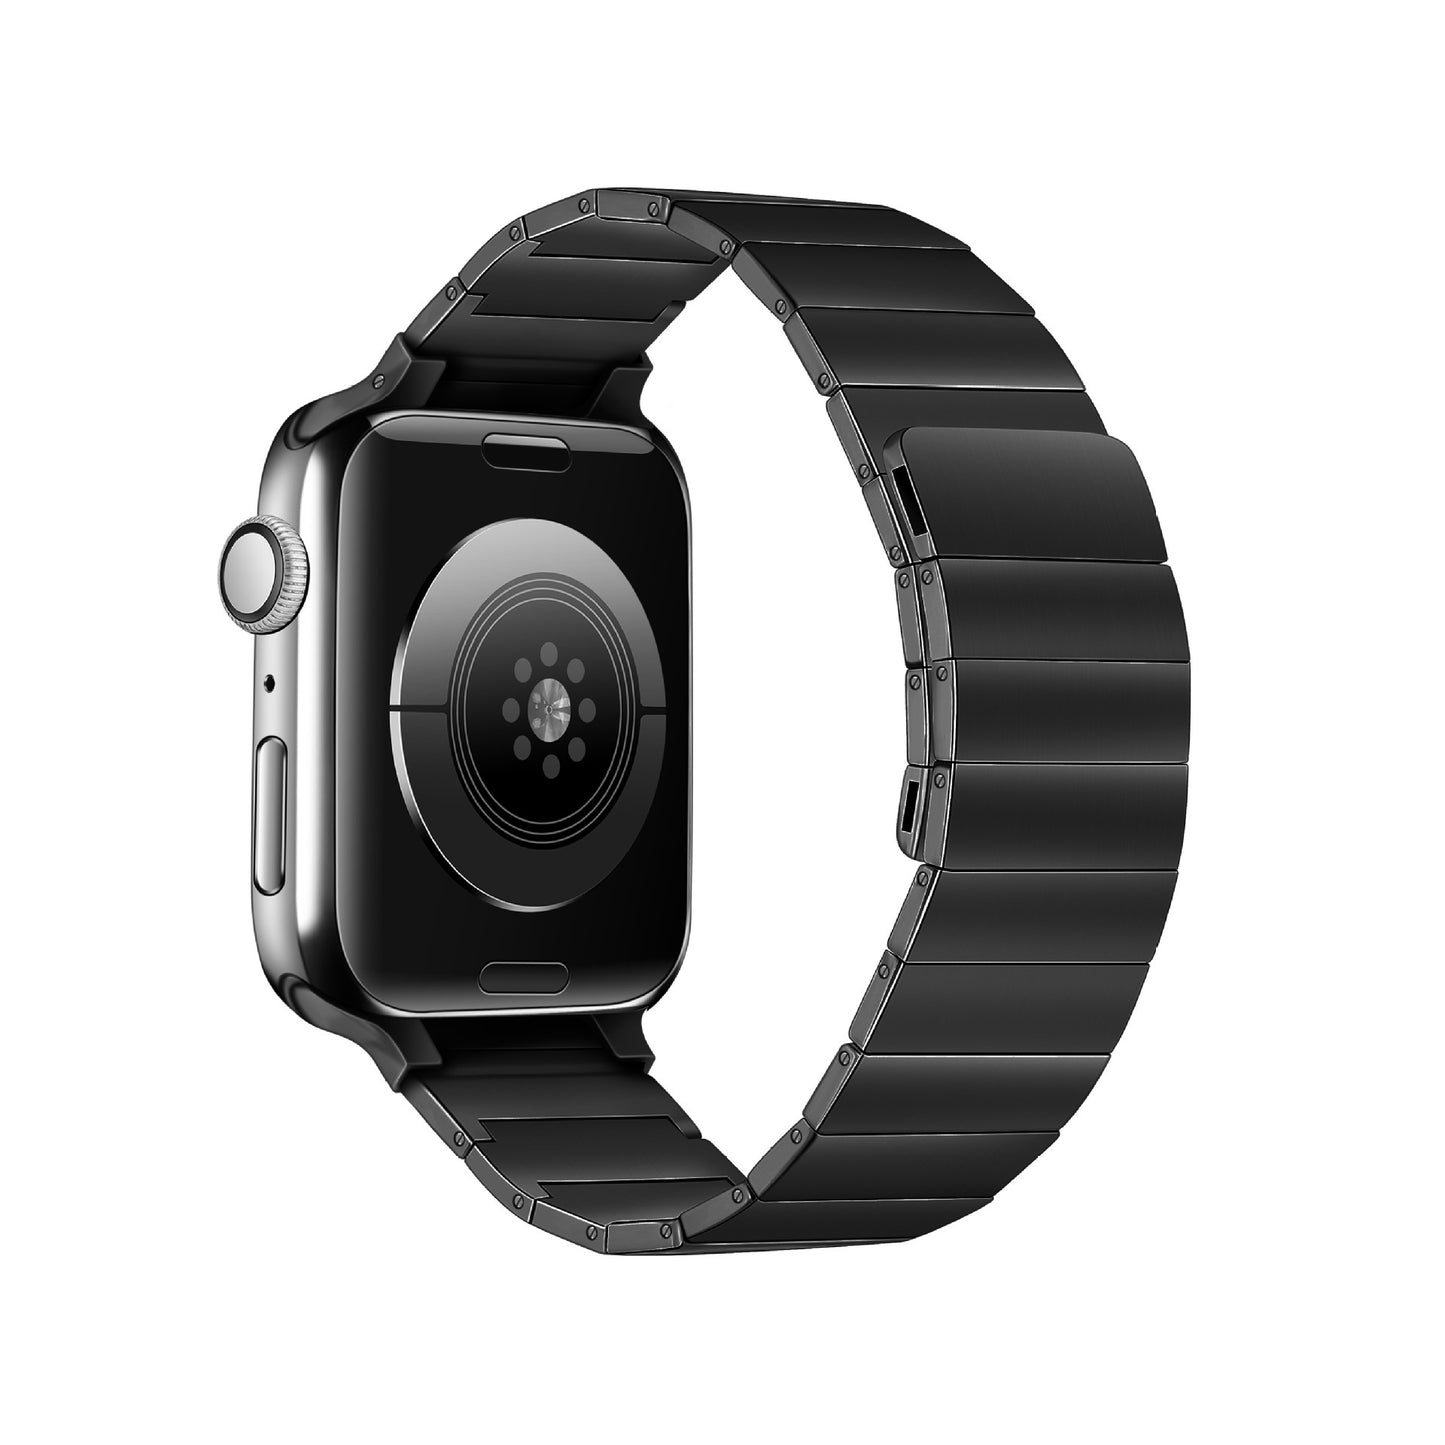 Magnetically Absorb A Bamboo Knot Iwatch Watch Strap